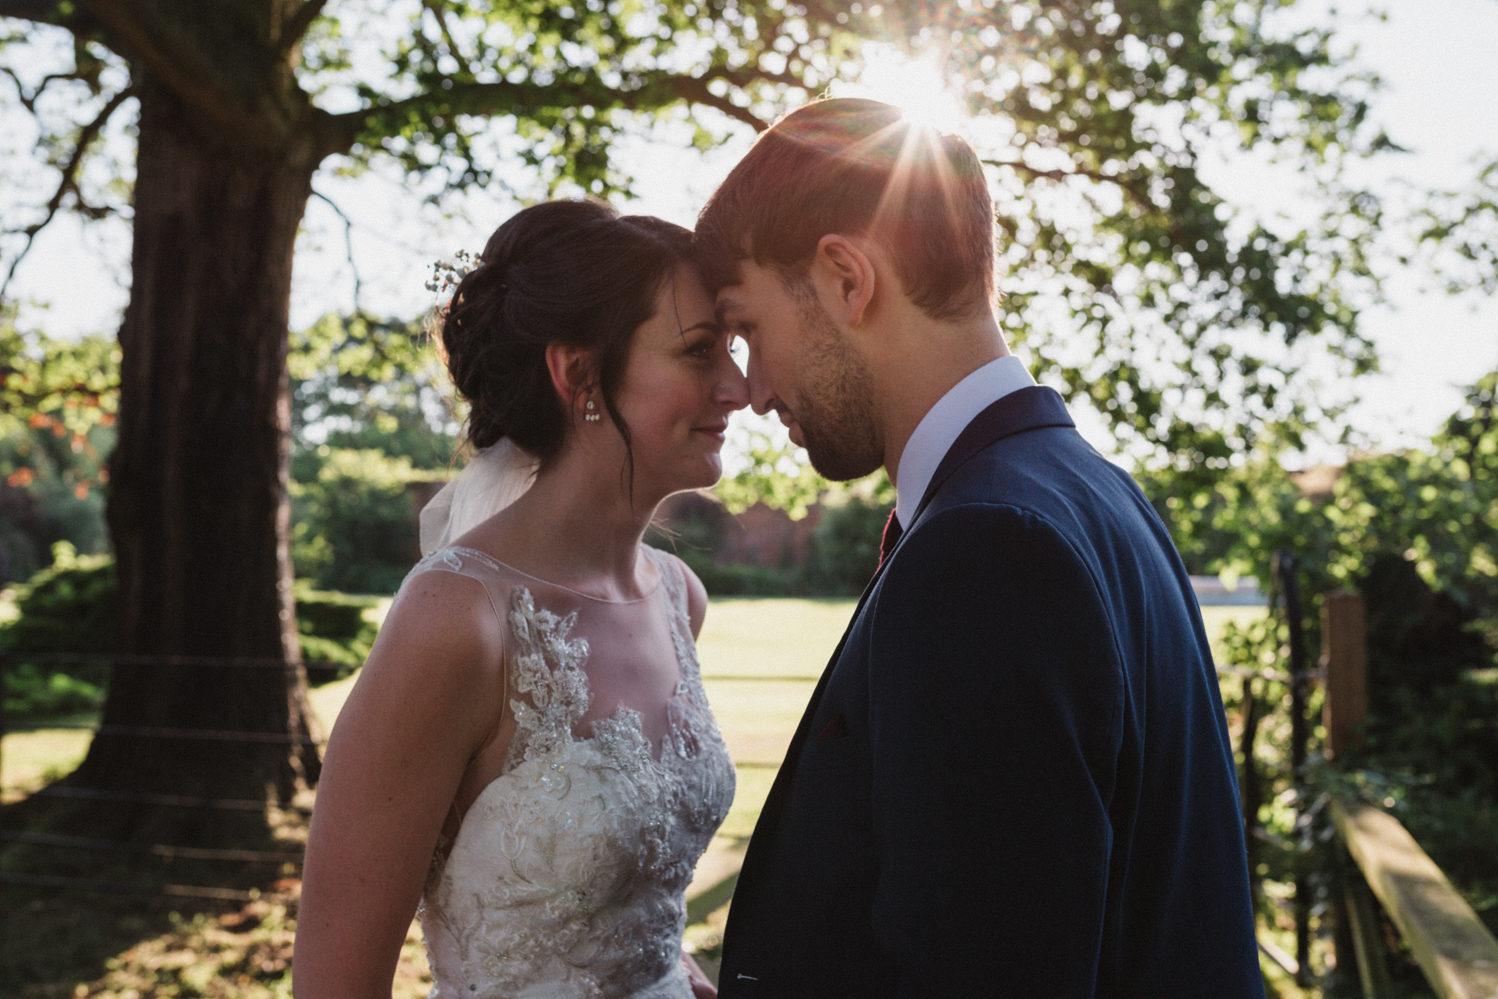 outdoors couples portraits at a natural pretty elms barn wedding in suffolk